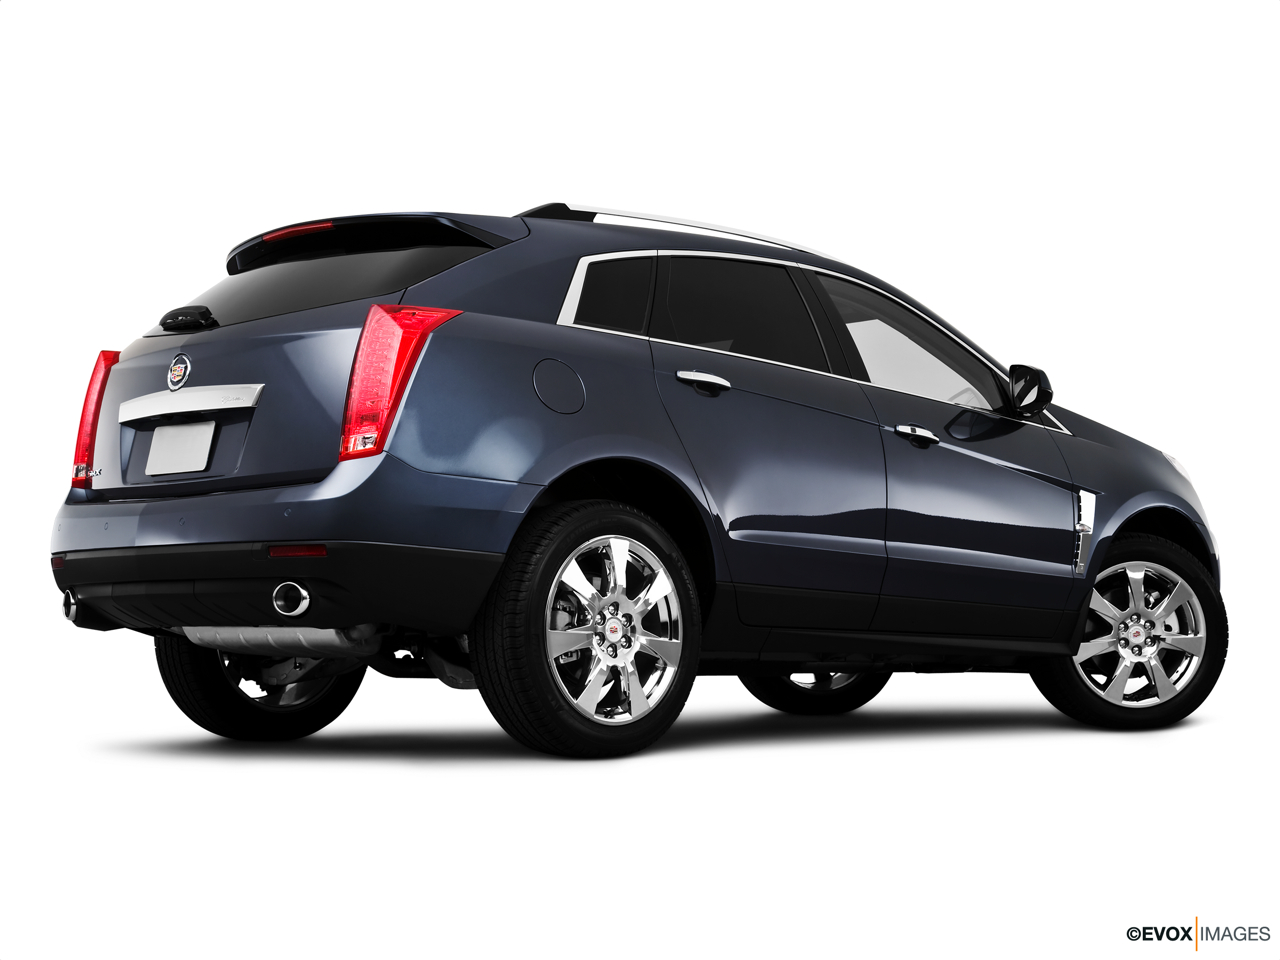 2010 Cadillac SRX Crossover Premium Collection Low/wide rear 5/8. 